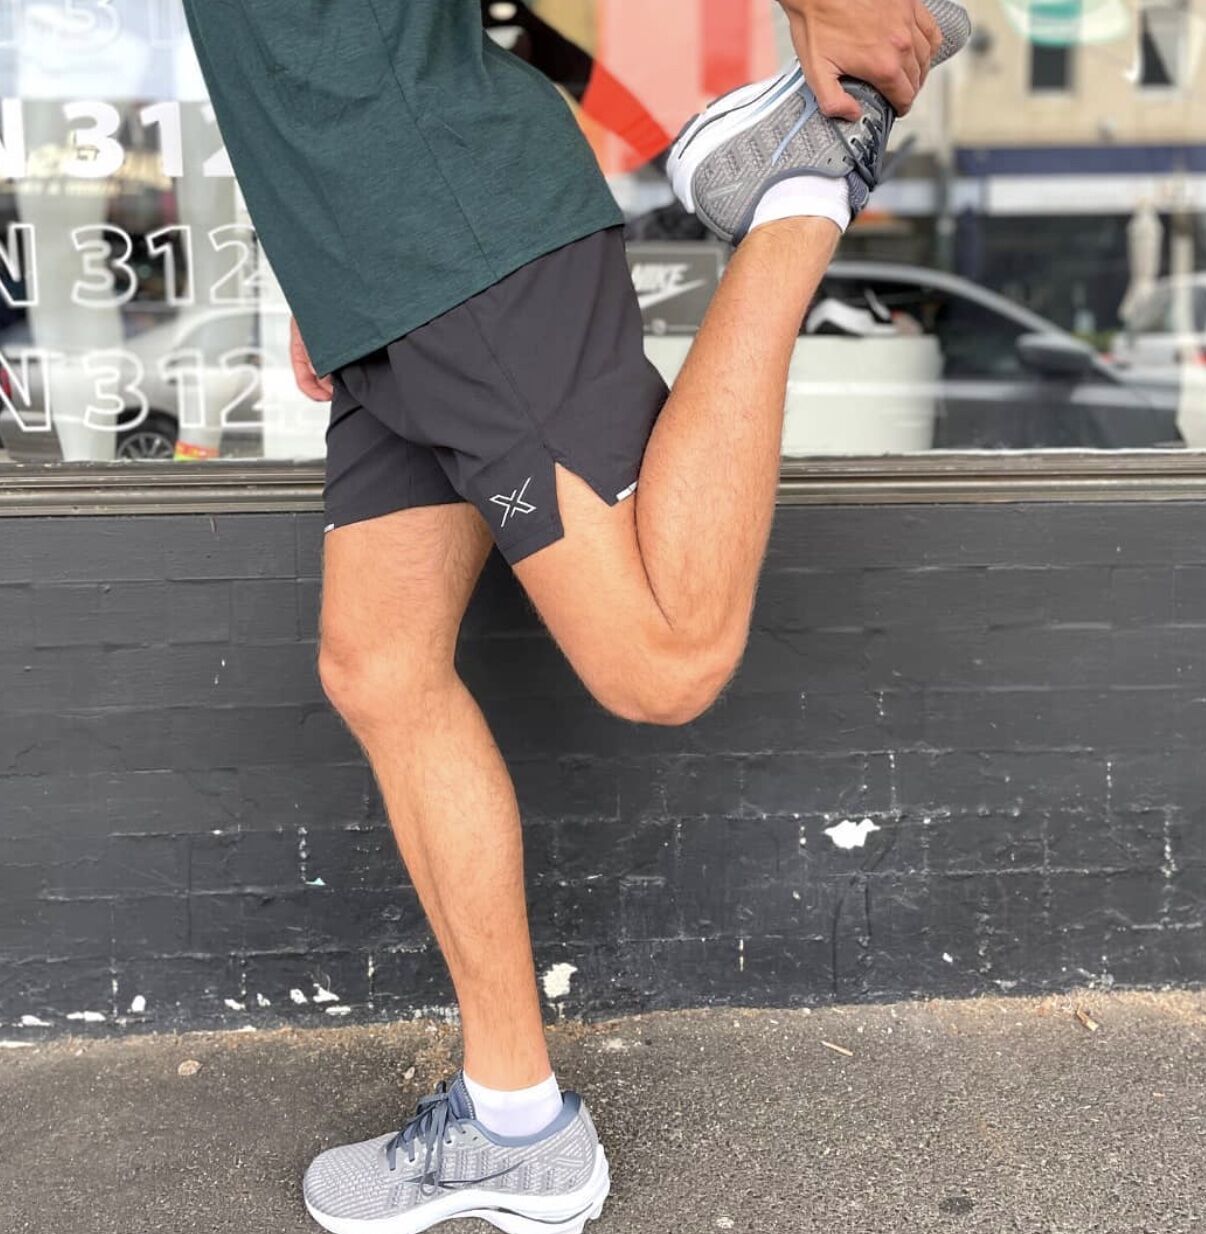 Man wearing the best running shorts while stretching